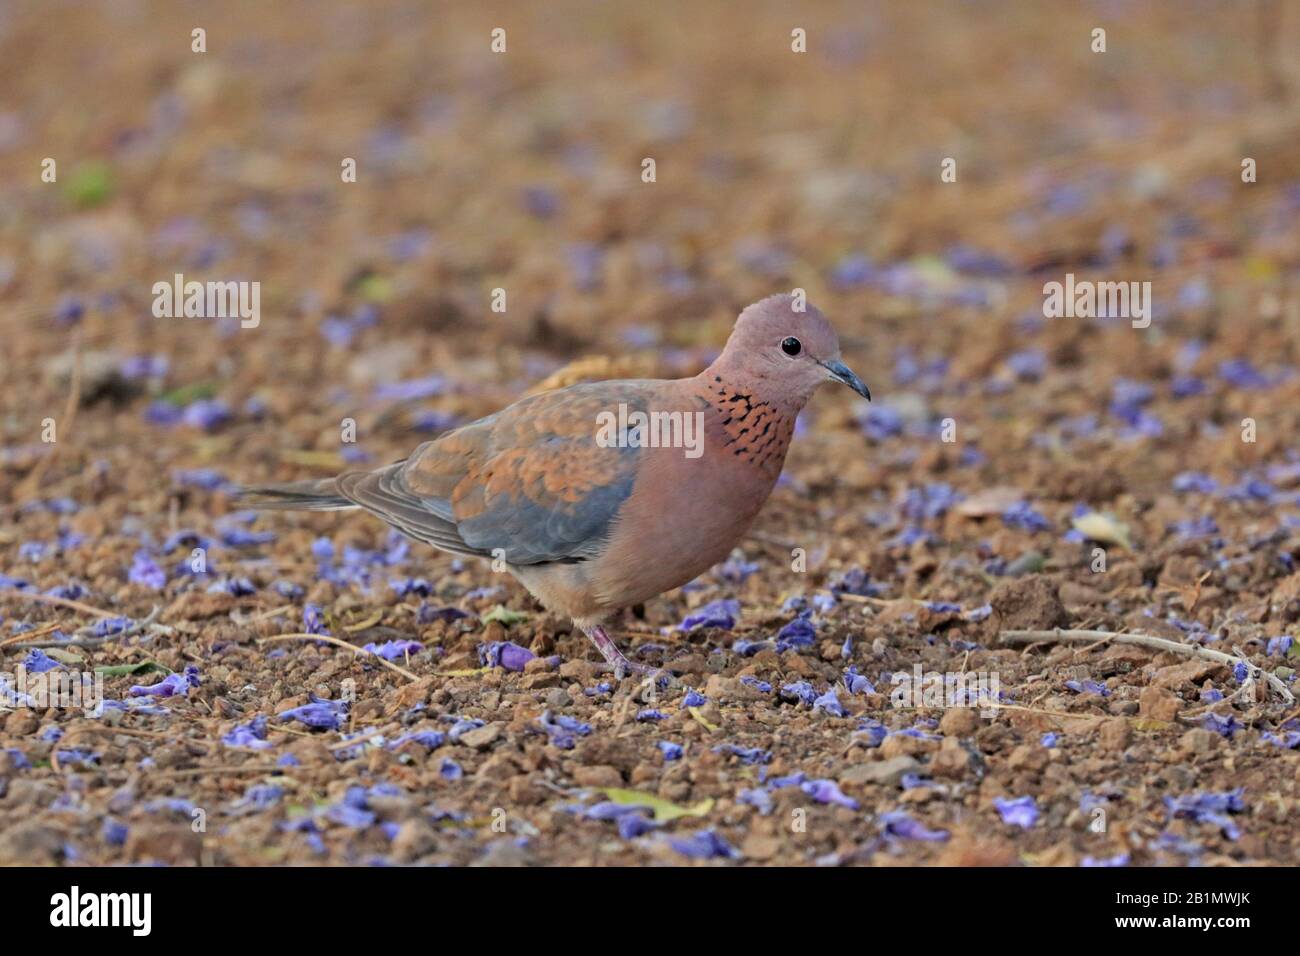 Laughing Dove on the ground amongst Jacaranda flowers in Ethiopia Stock Photo